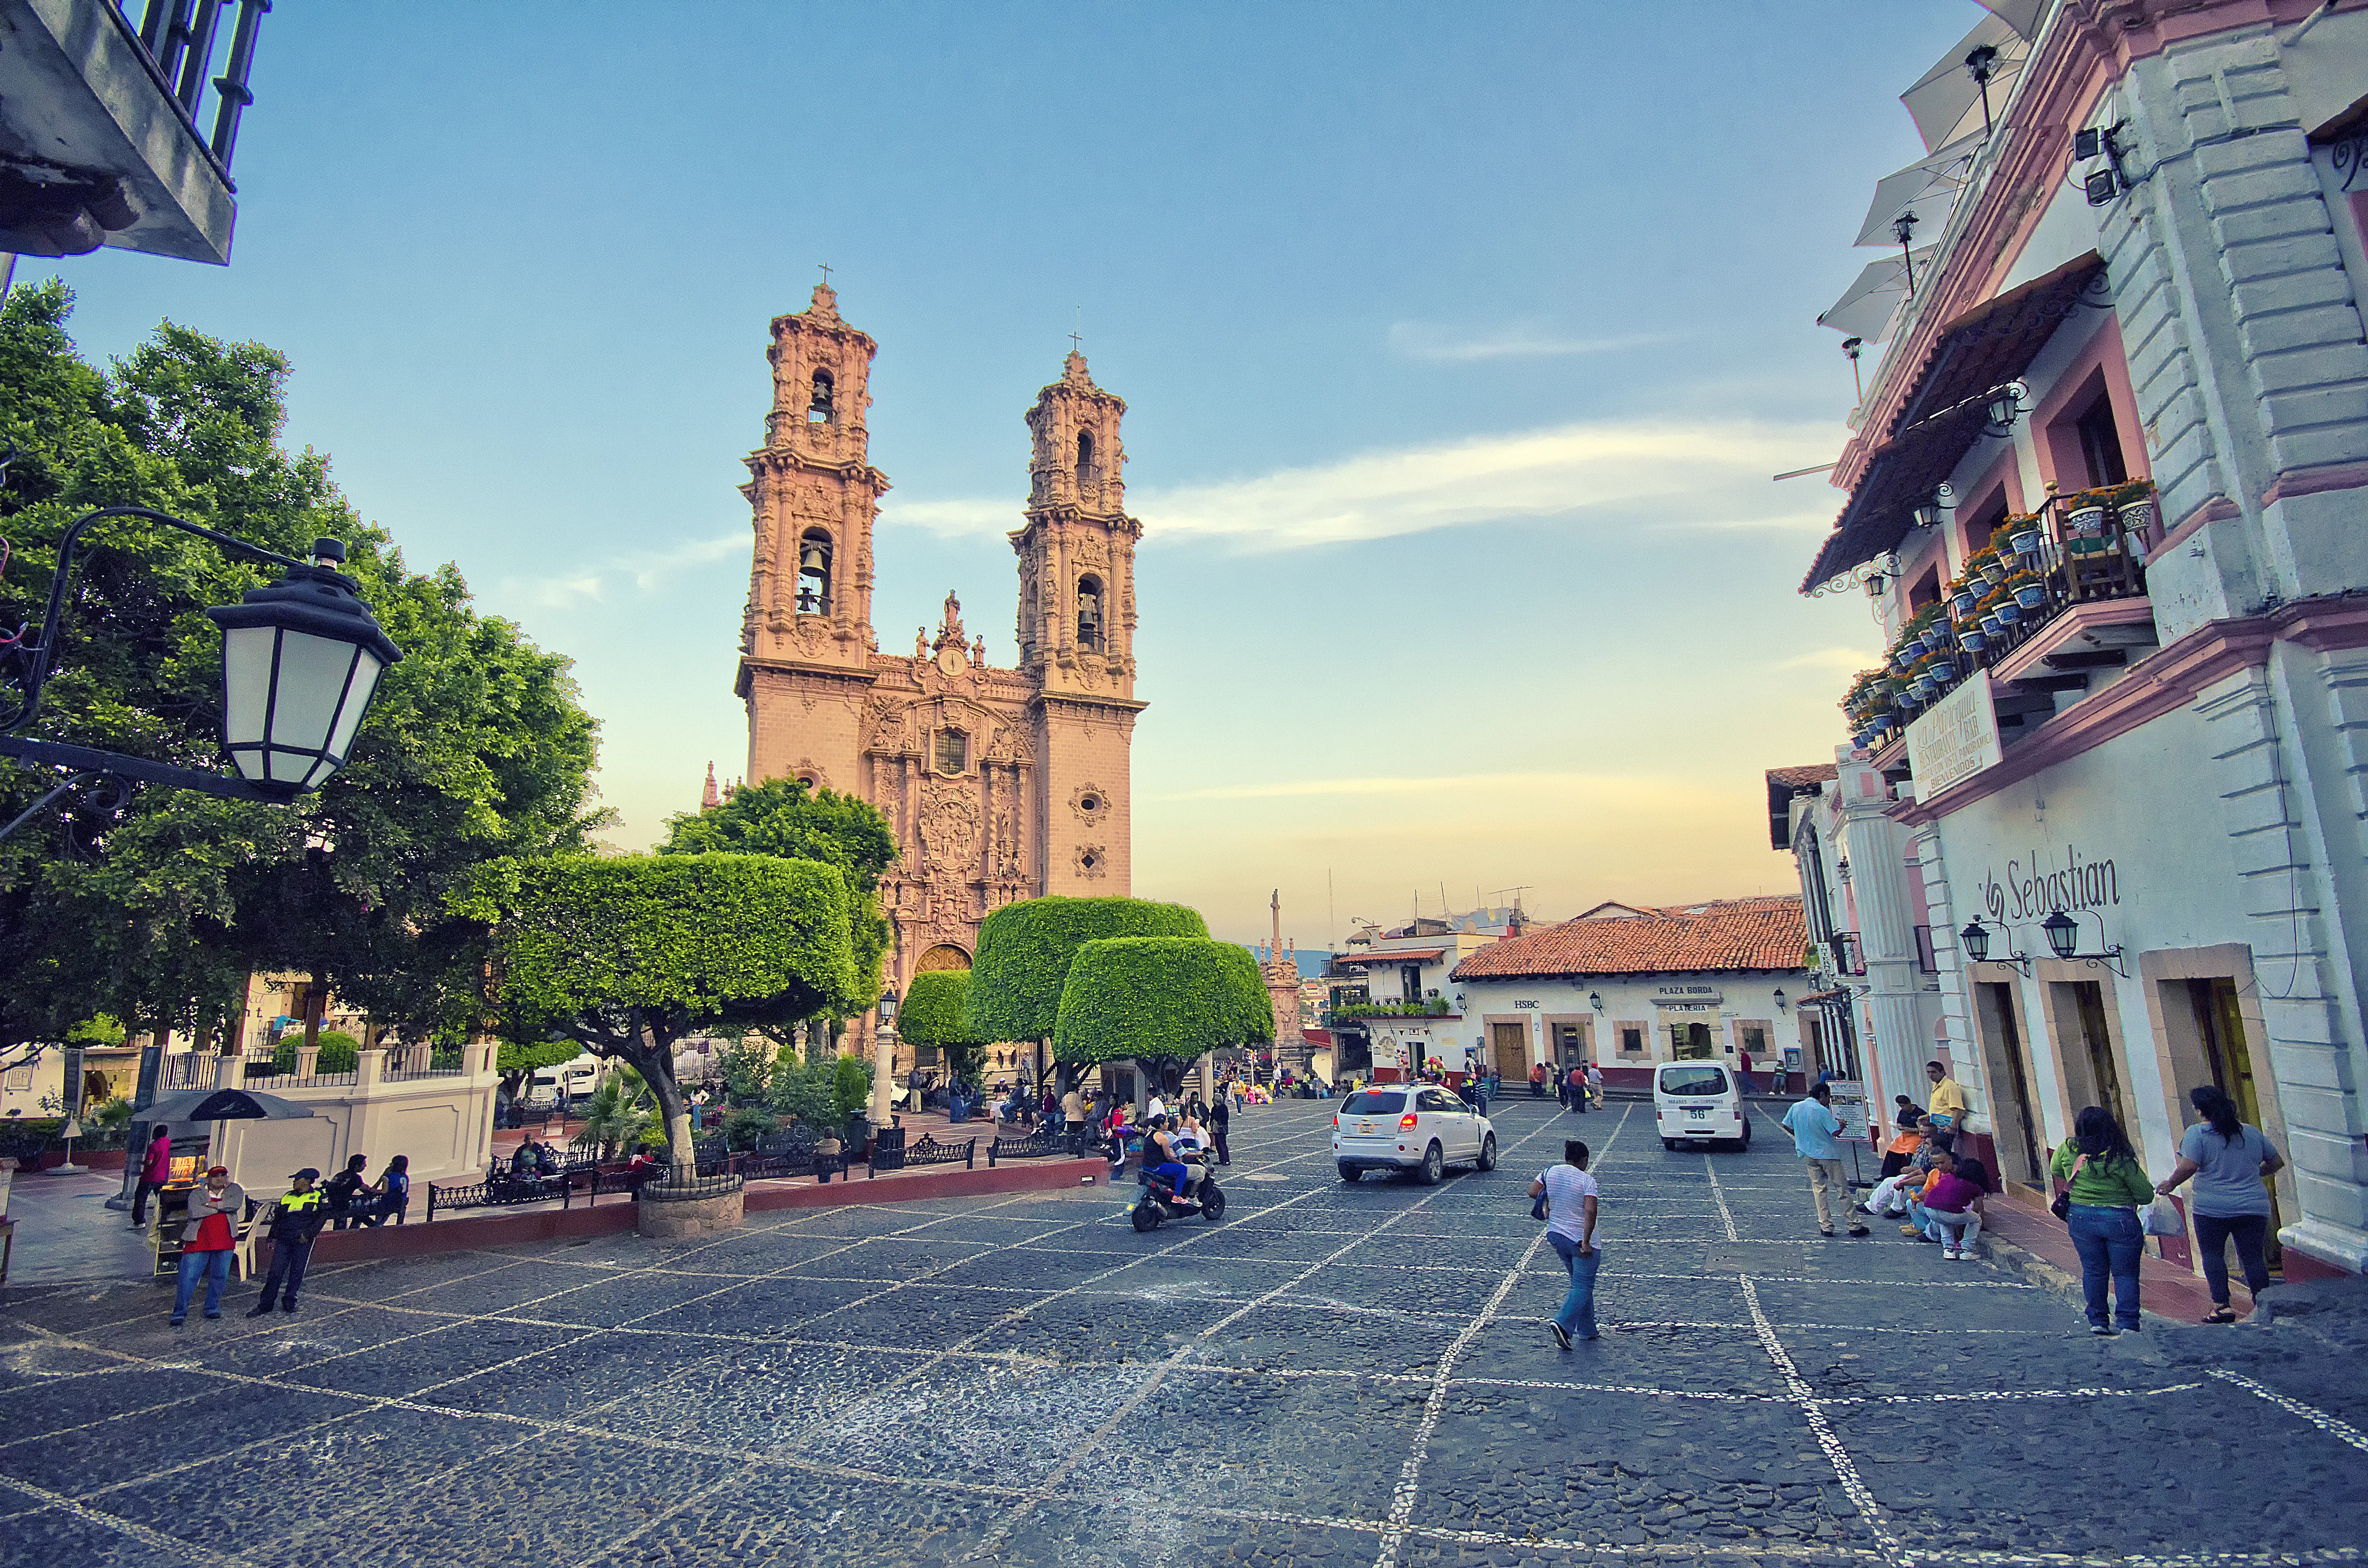 The central plaza in Taxco, a city in the state of Guerrero, Mexico.?w=200&h=150